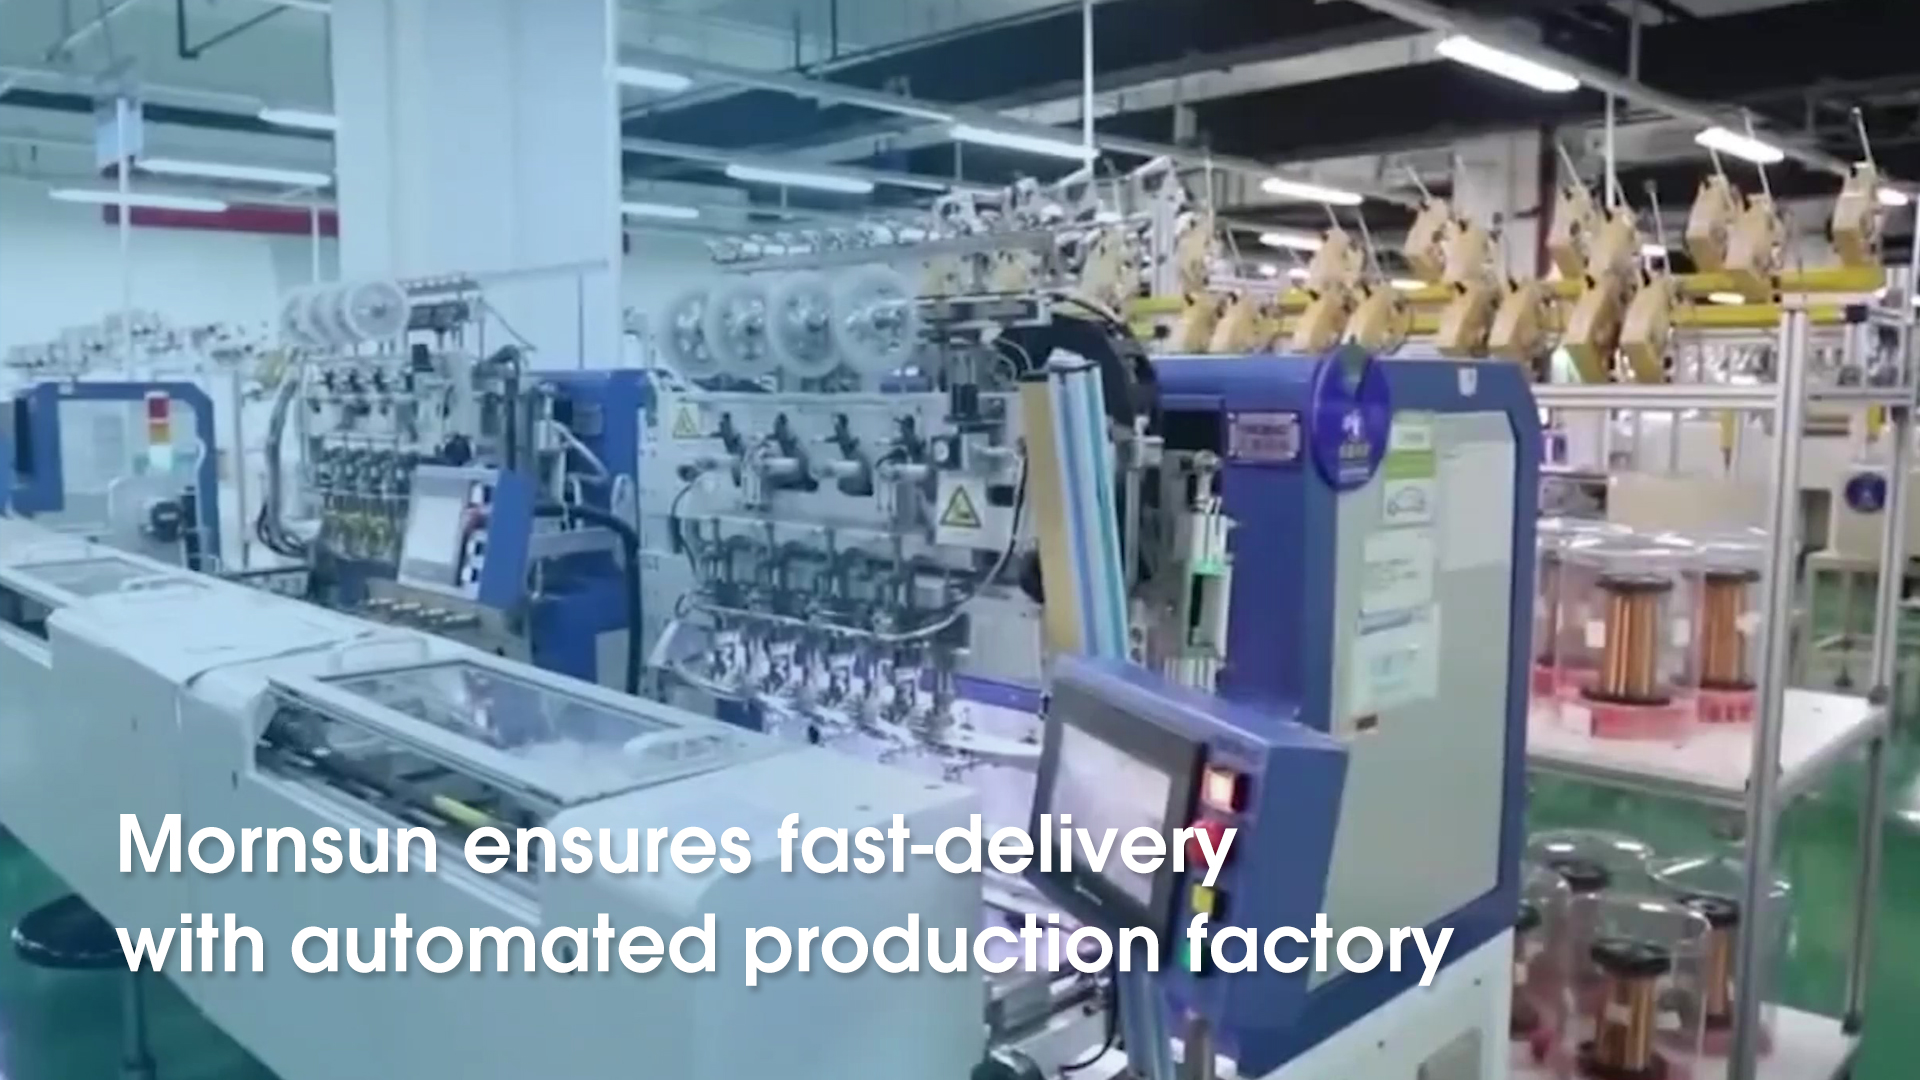 MORNSUN Ensures Fast Delivery with Automated Production Factory